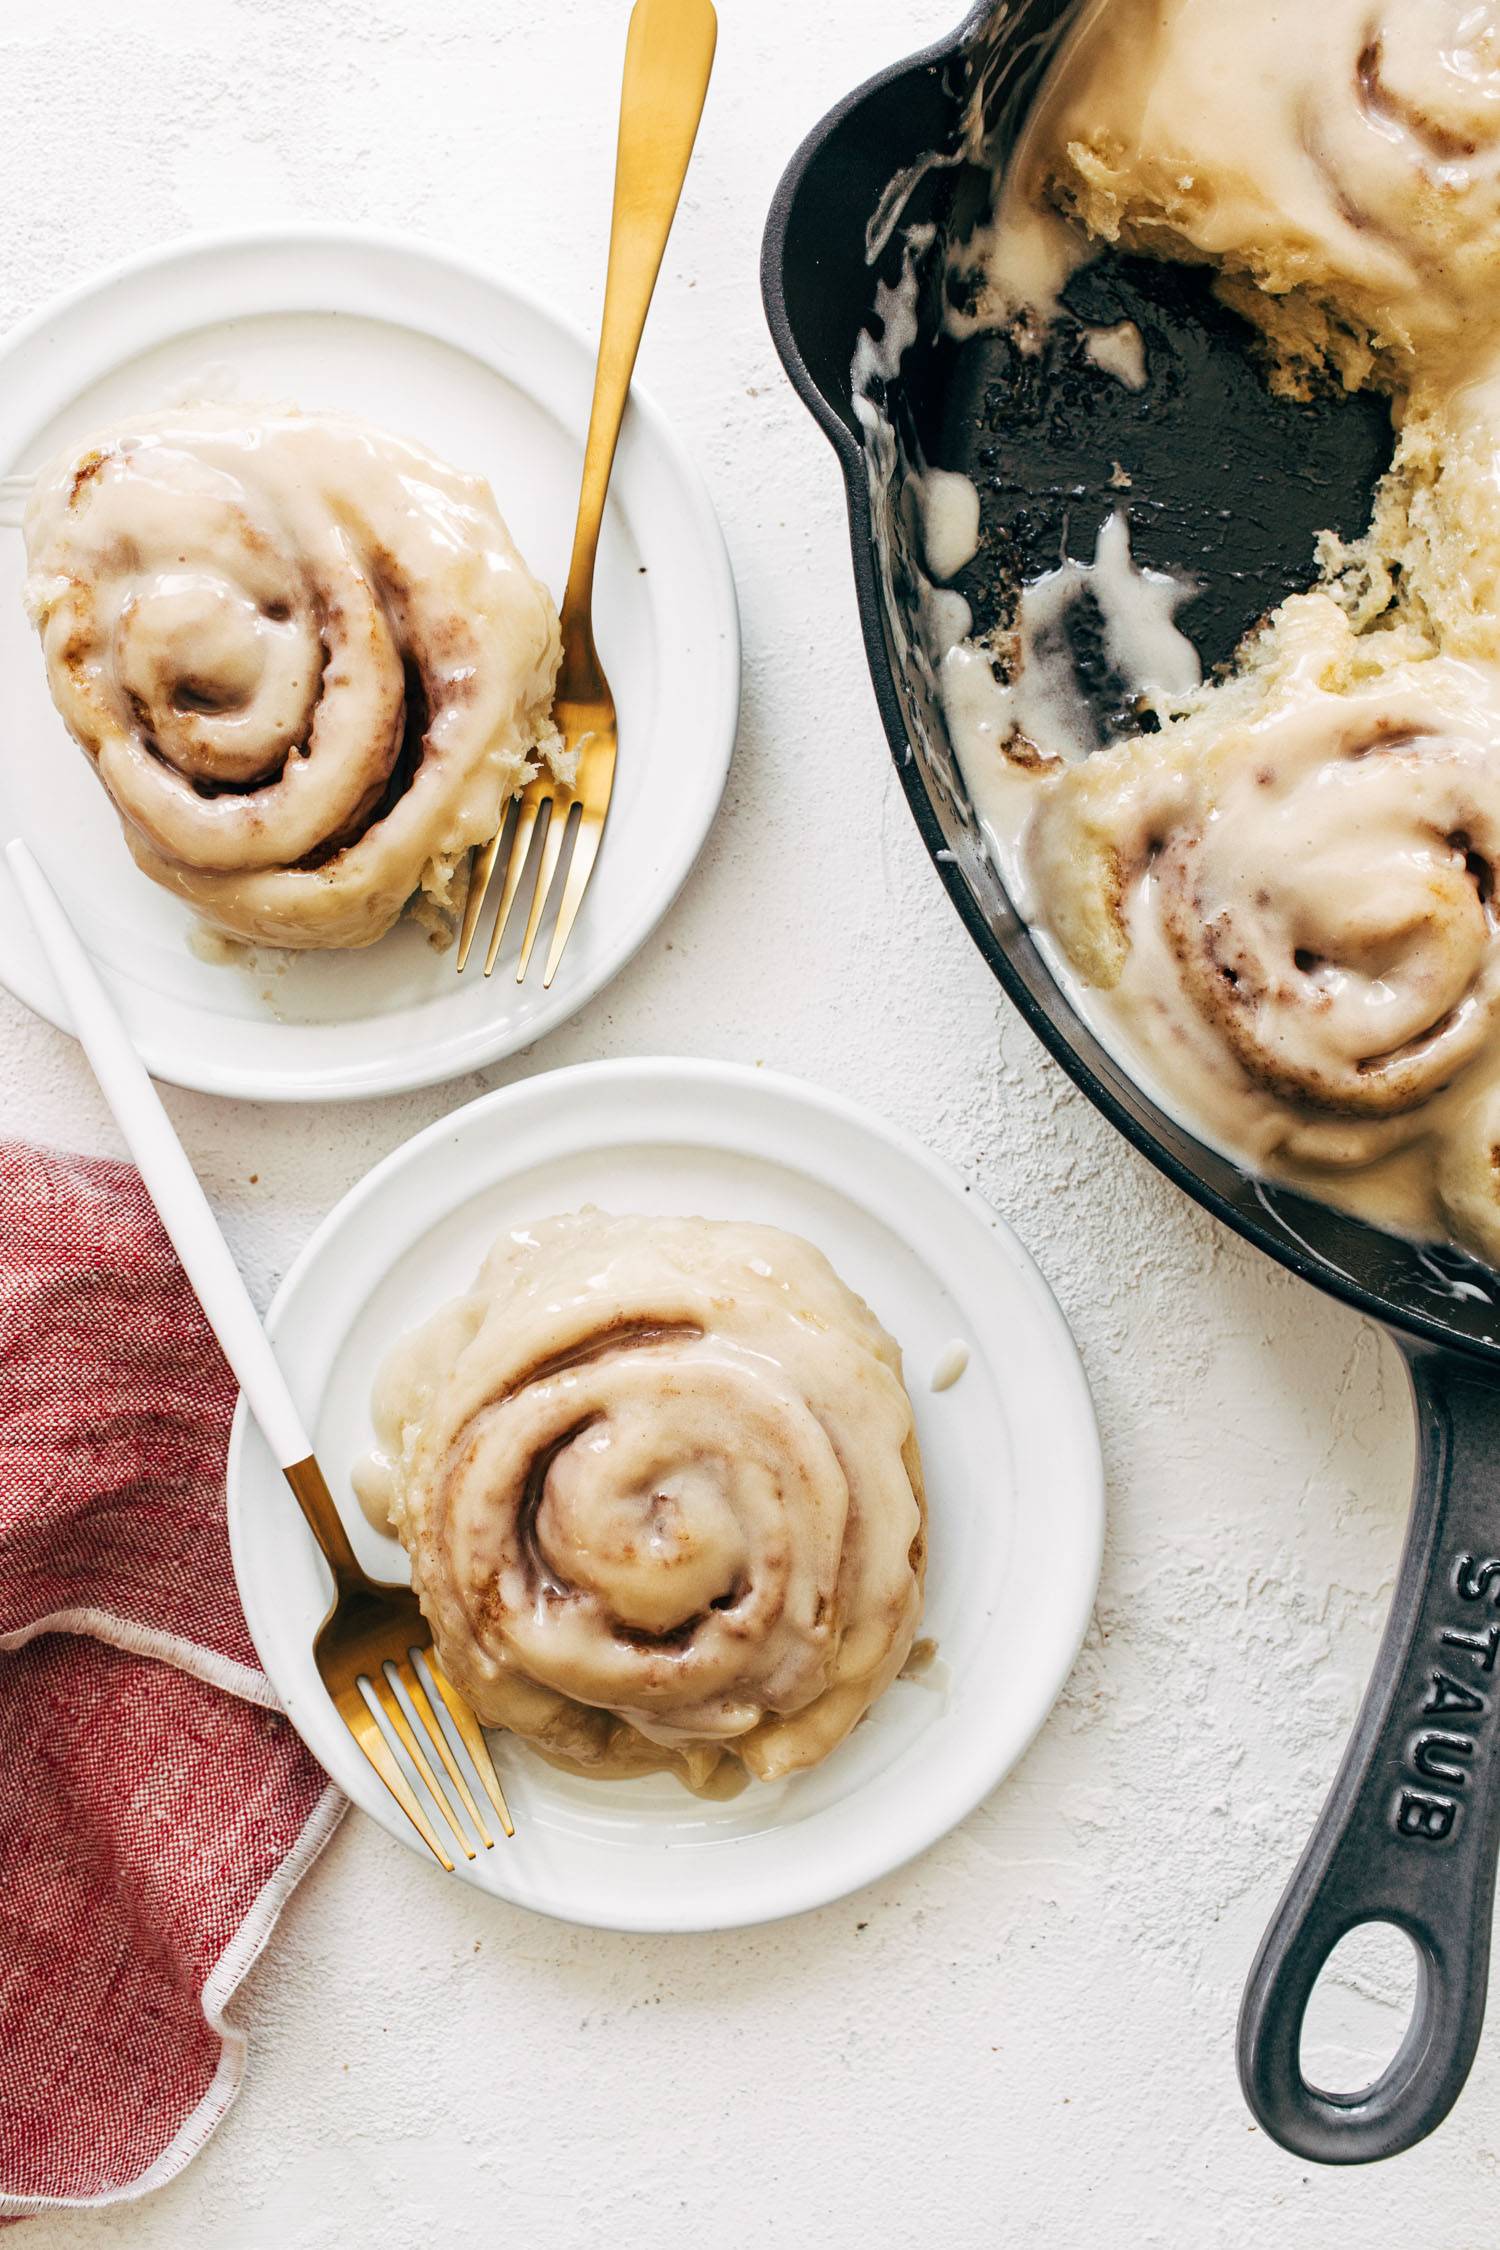 Cinnamon rolls with glaze on plates with forks.